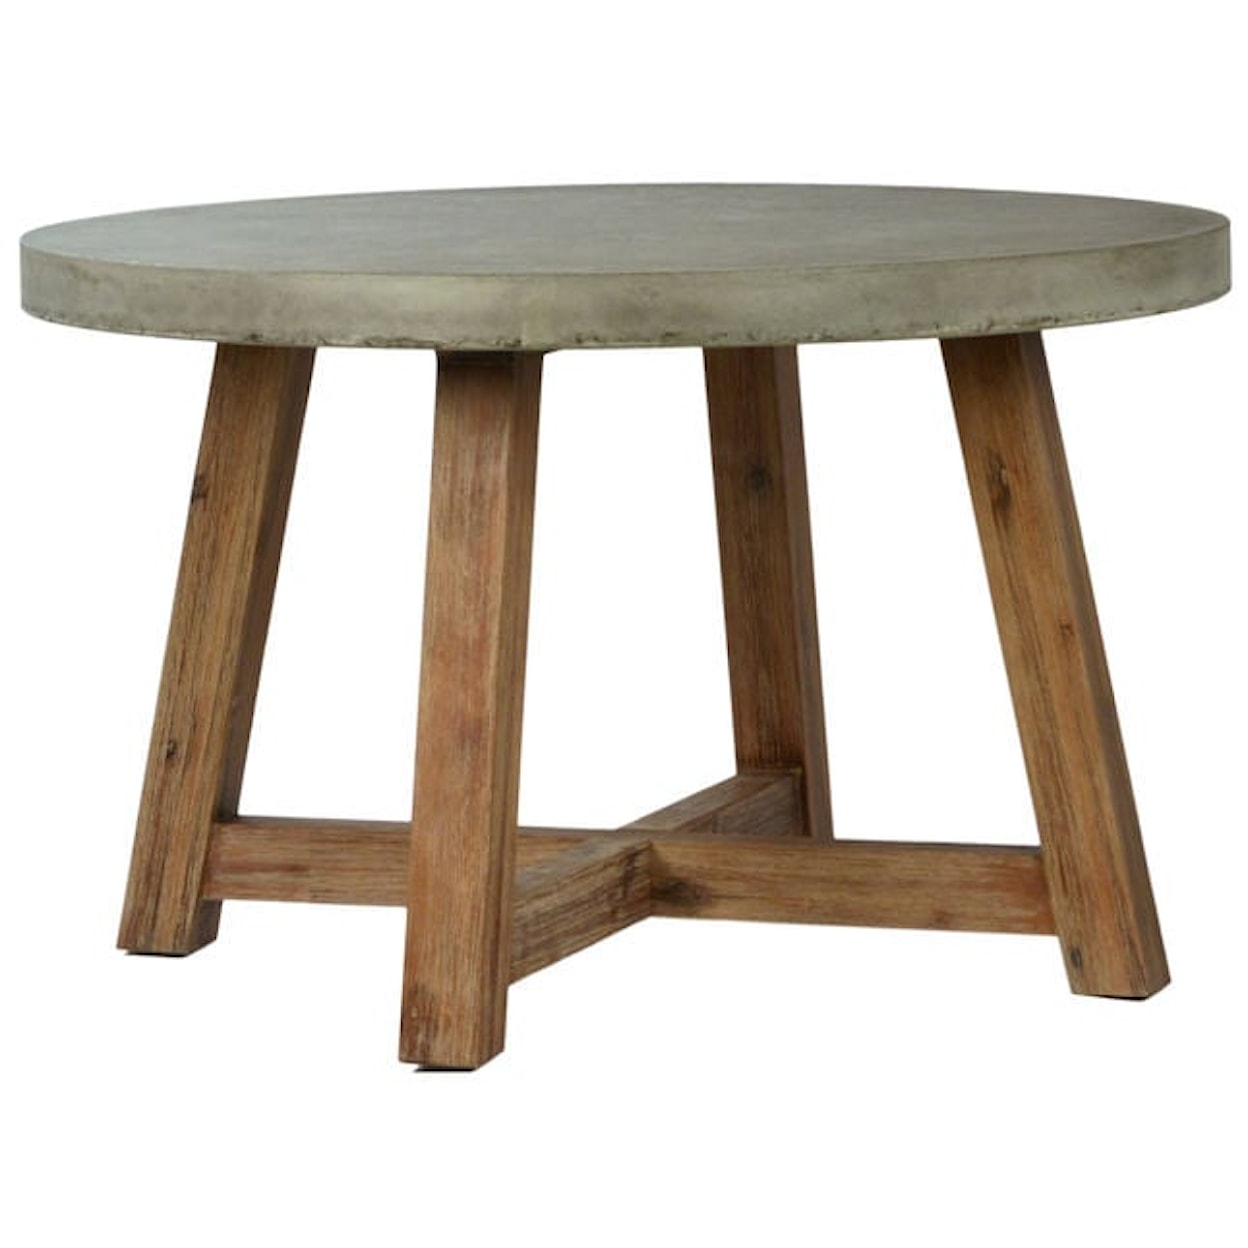 Dovetail Furniture Dining Welch Outdoor Dining Table